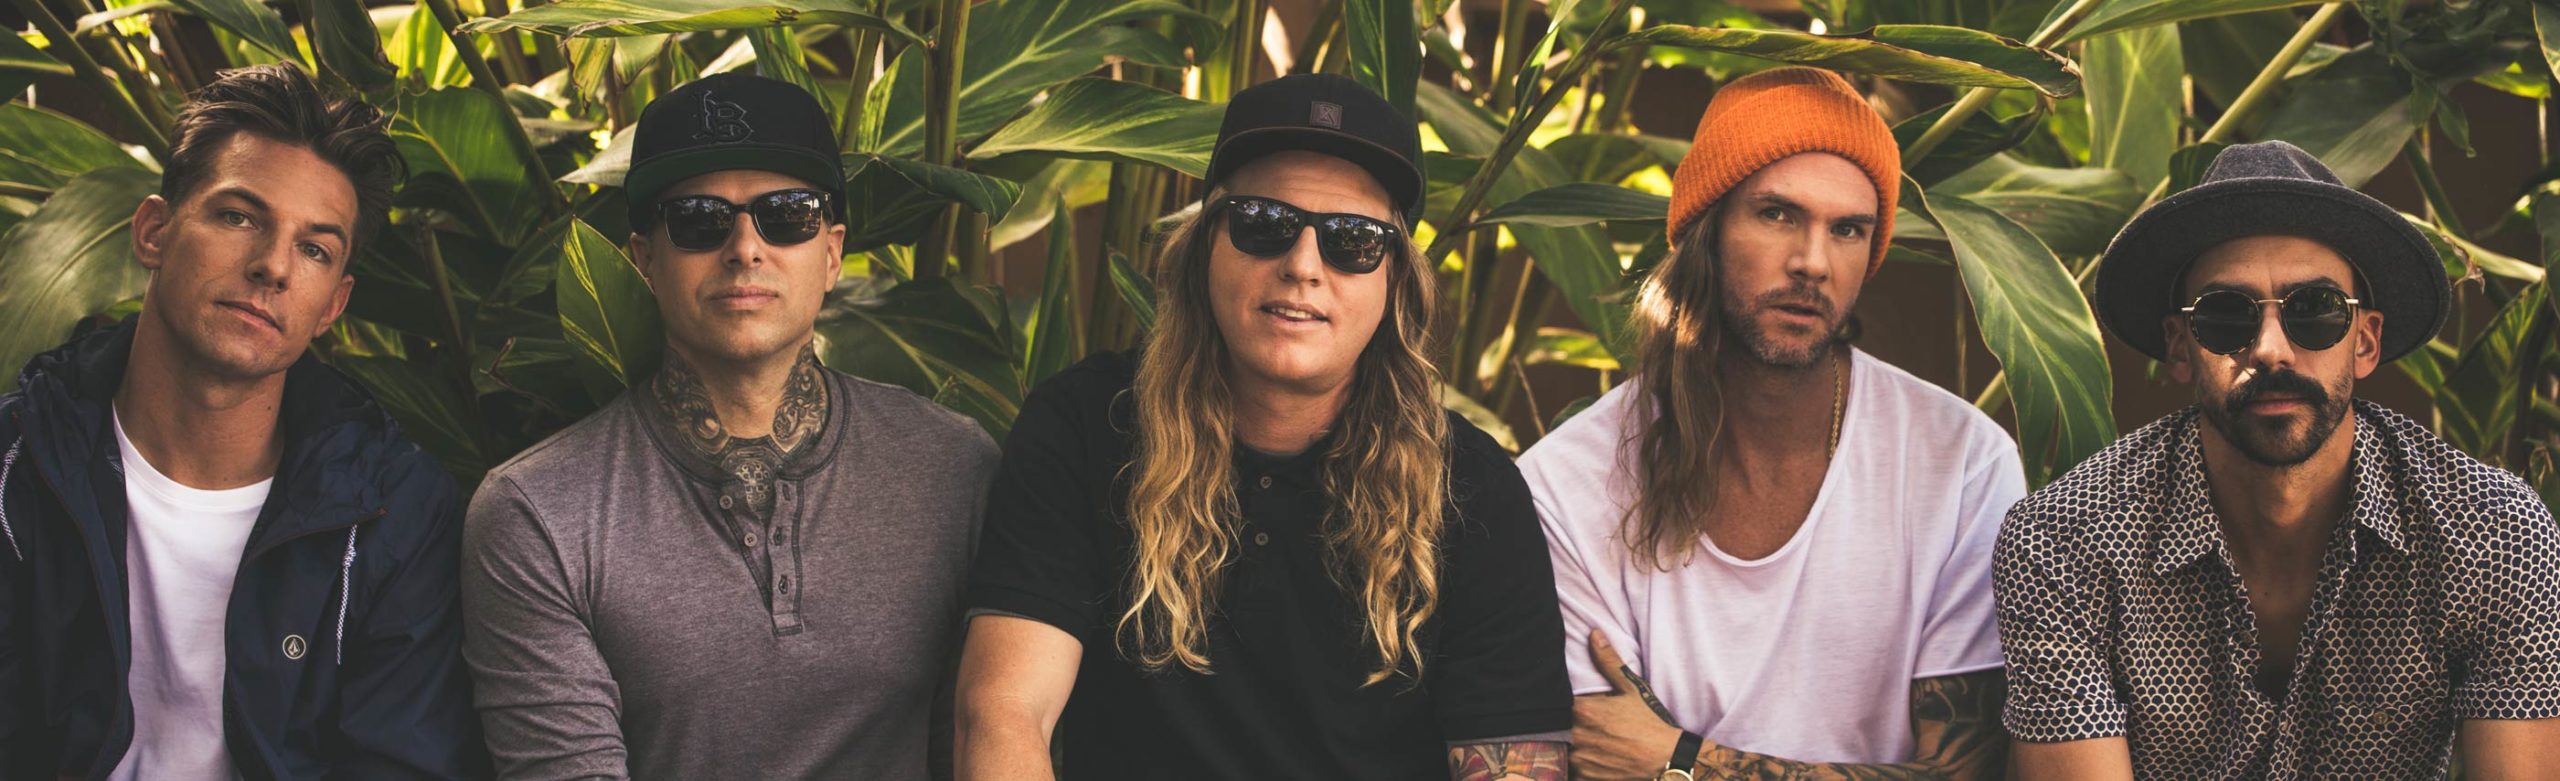 PLAYLIST: Dirty Heads Summer Tour 2018 Image